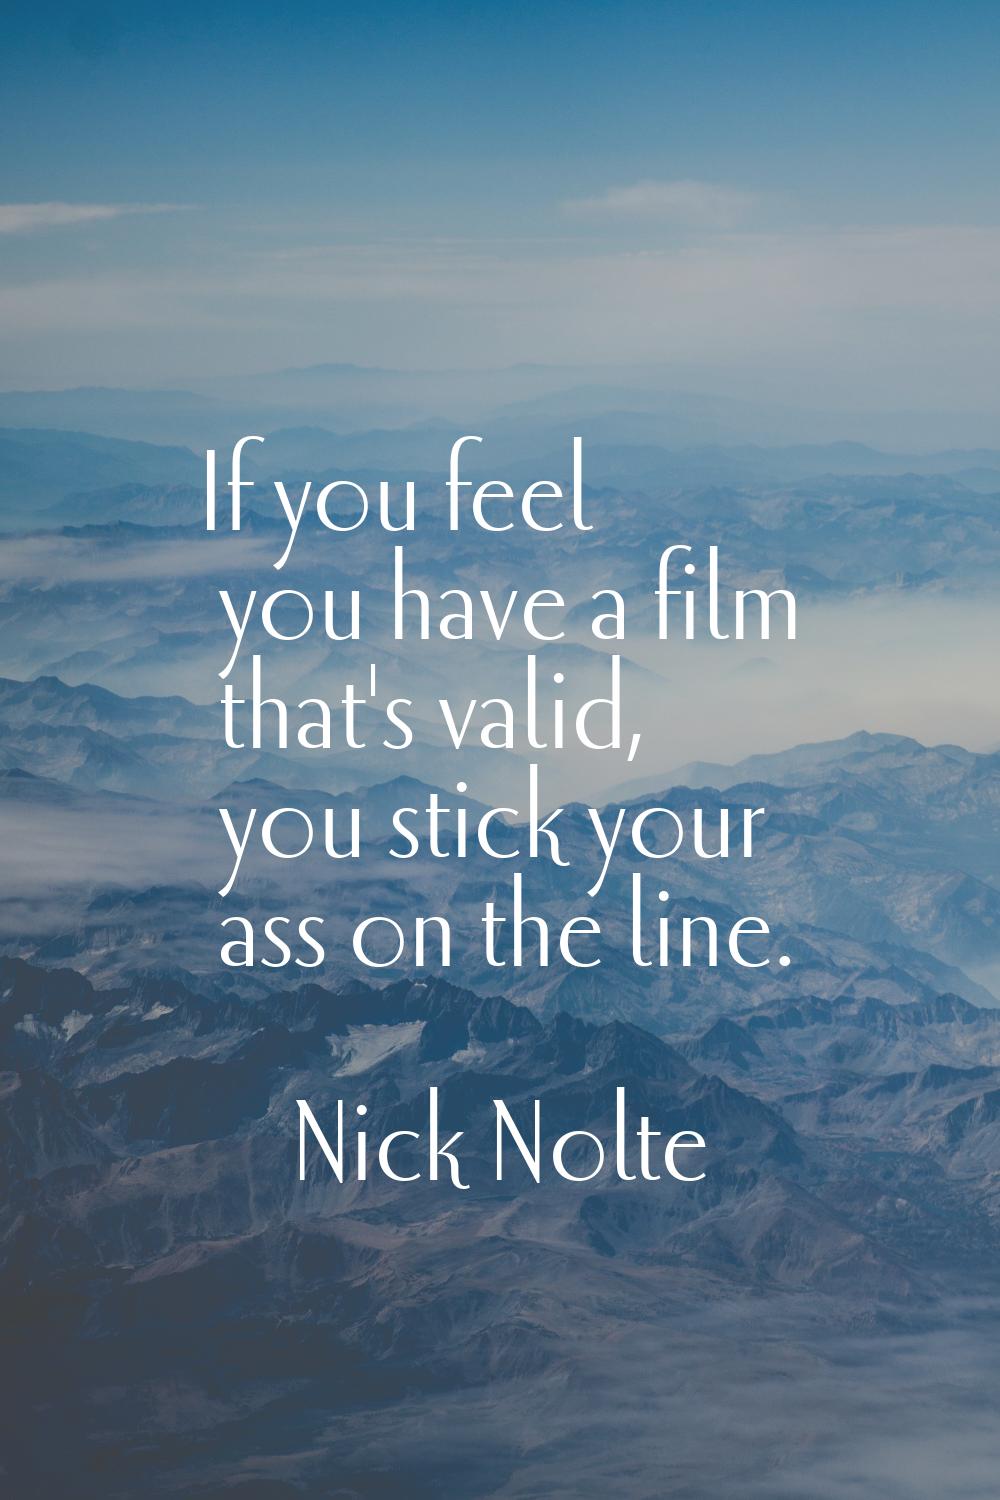 If you feel you have a film that's valid, you stick your ass on the line.